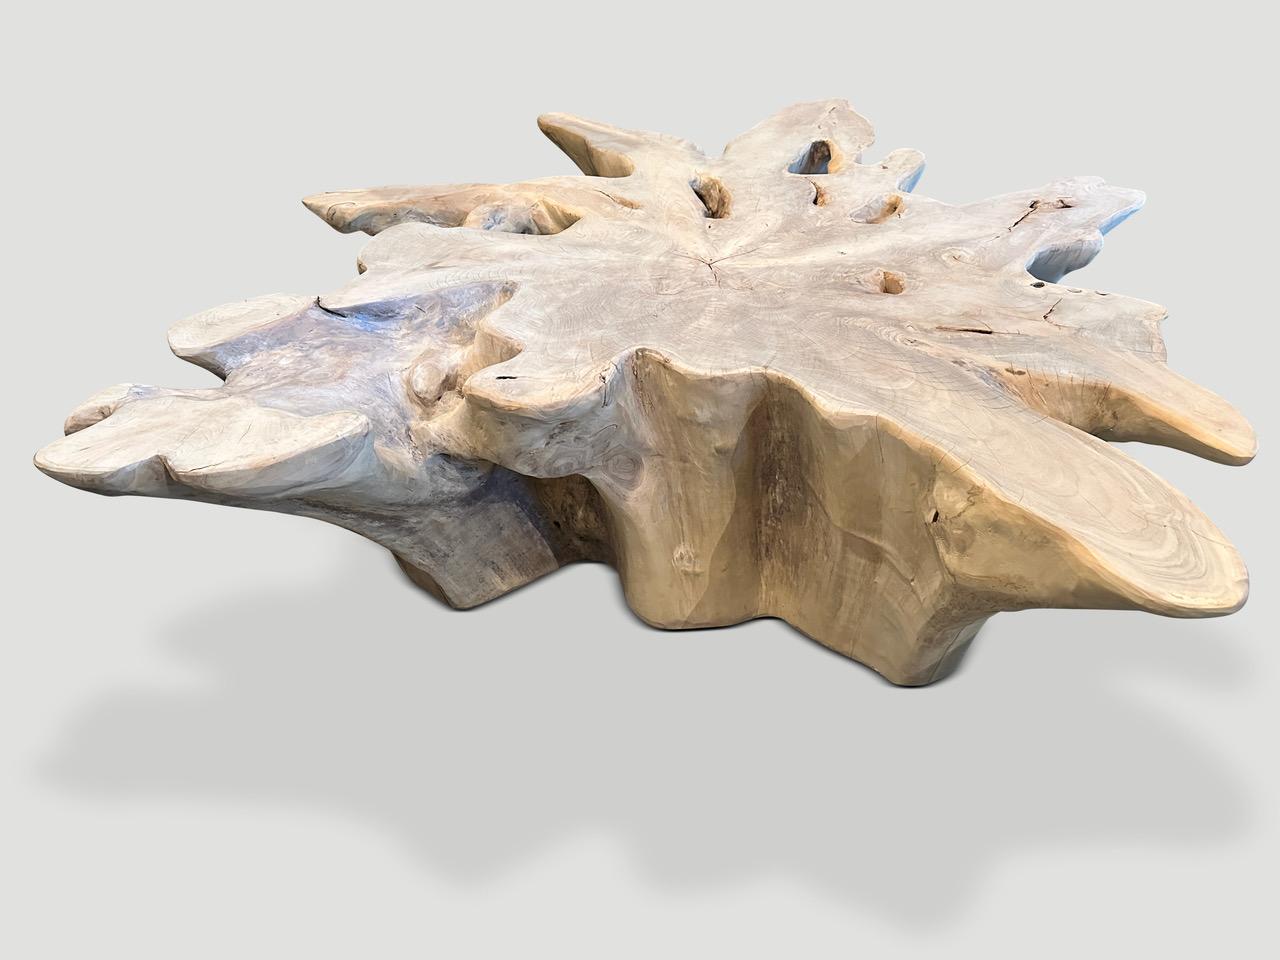 Impressive reclaimed bleached teak amorphous coffee table. A graduation from the bottom to the top. We added a light white wash revealing the beautiful wood grain. It’s all in the details.

The St. Barts Collection features an exciting line of